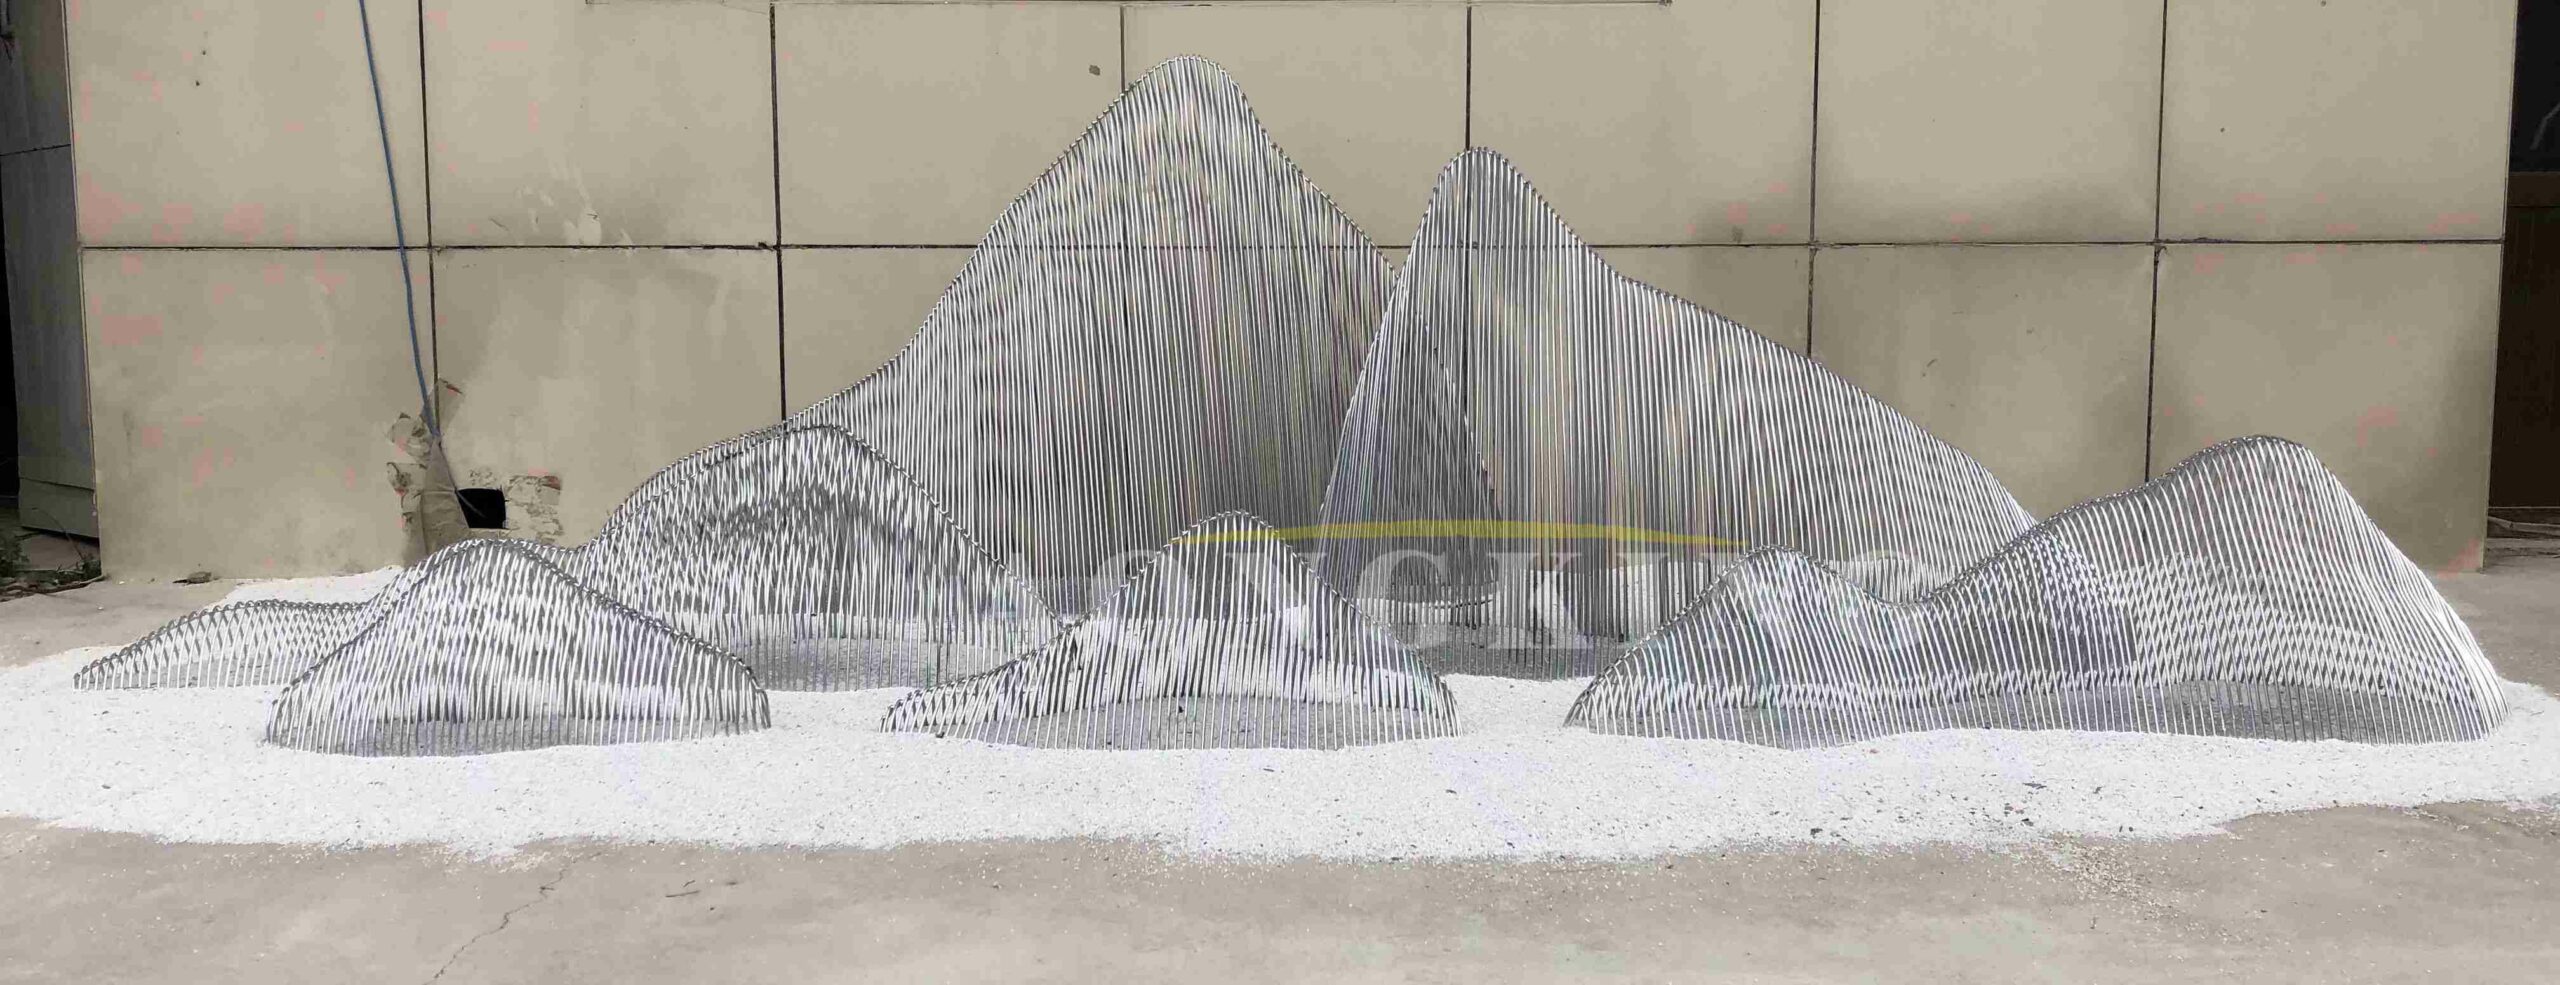 stainless steel wire mesh outdoor sculpture (3)